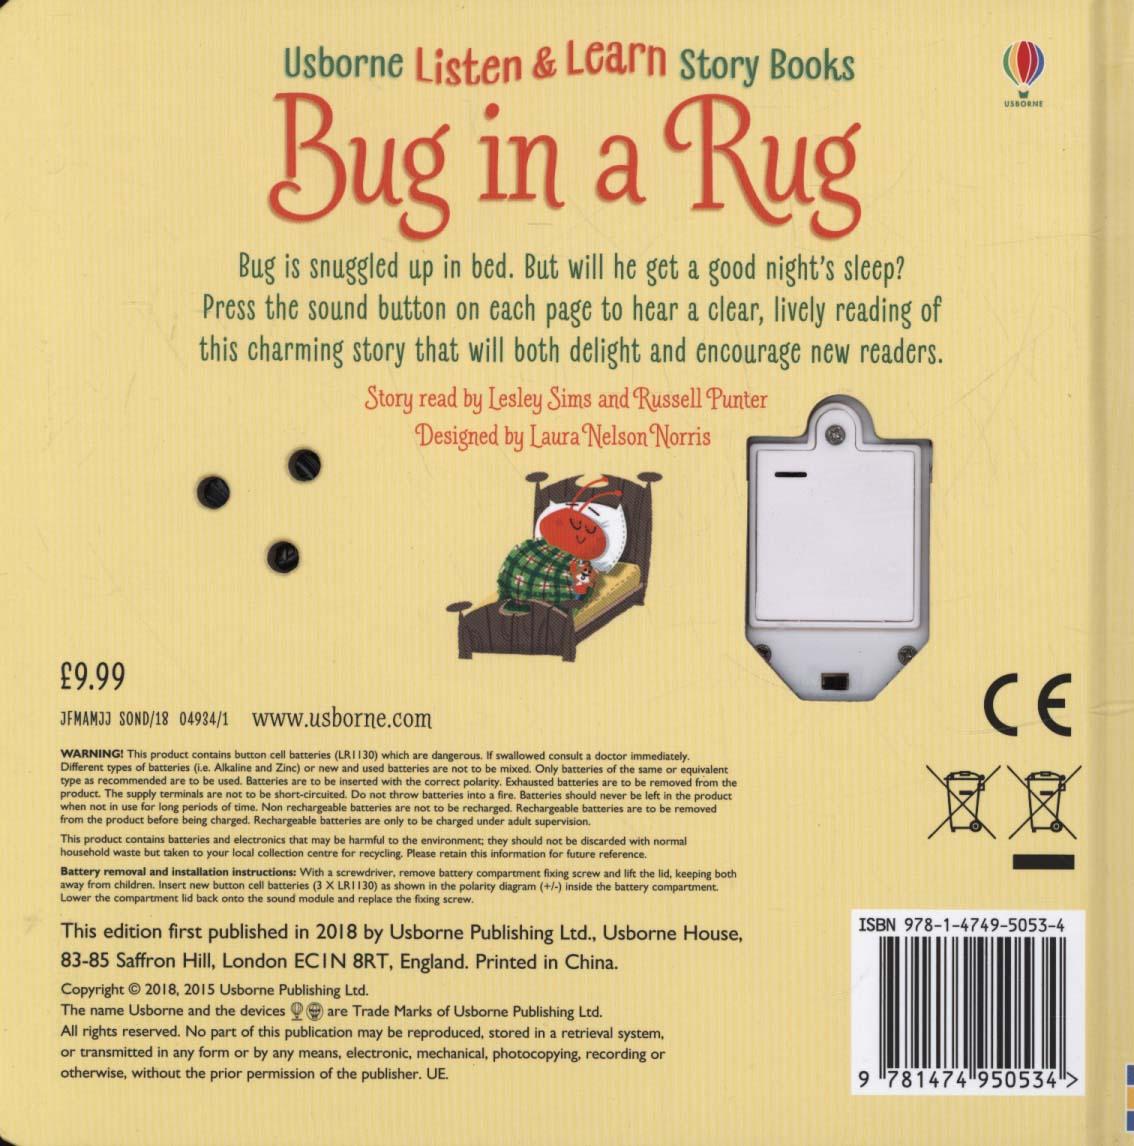 Bug in a Rug